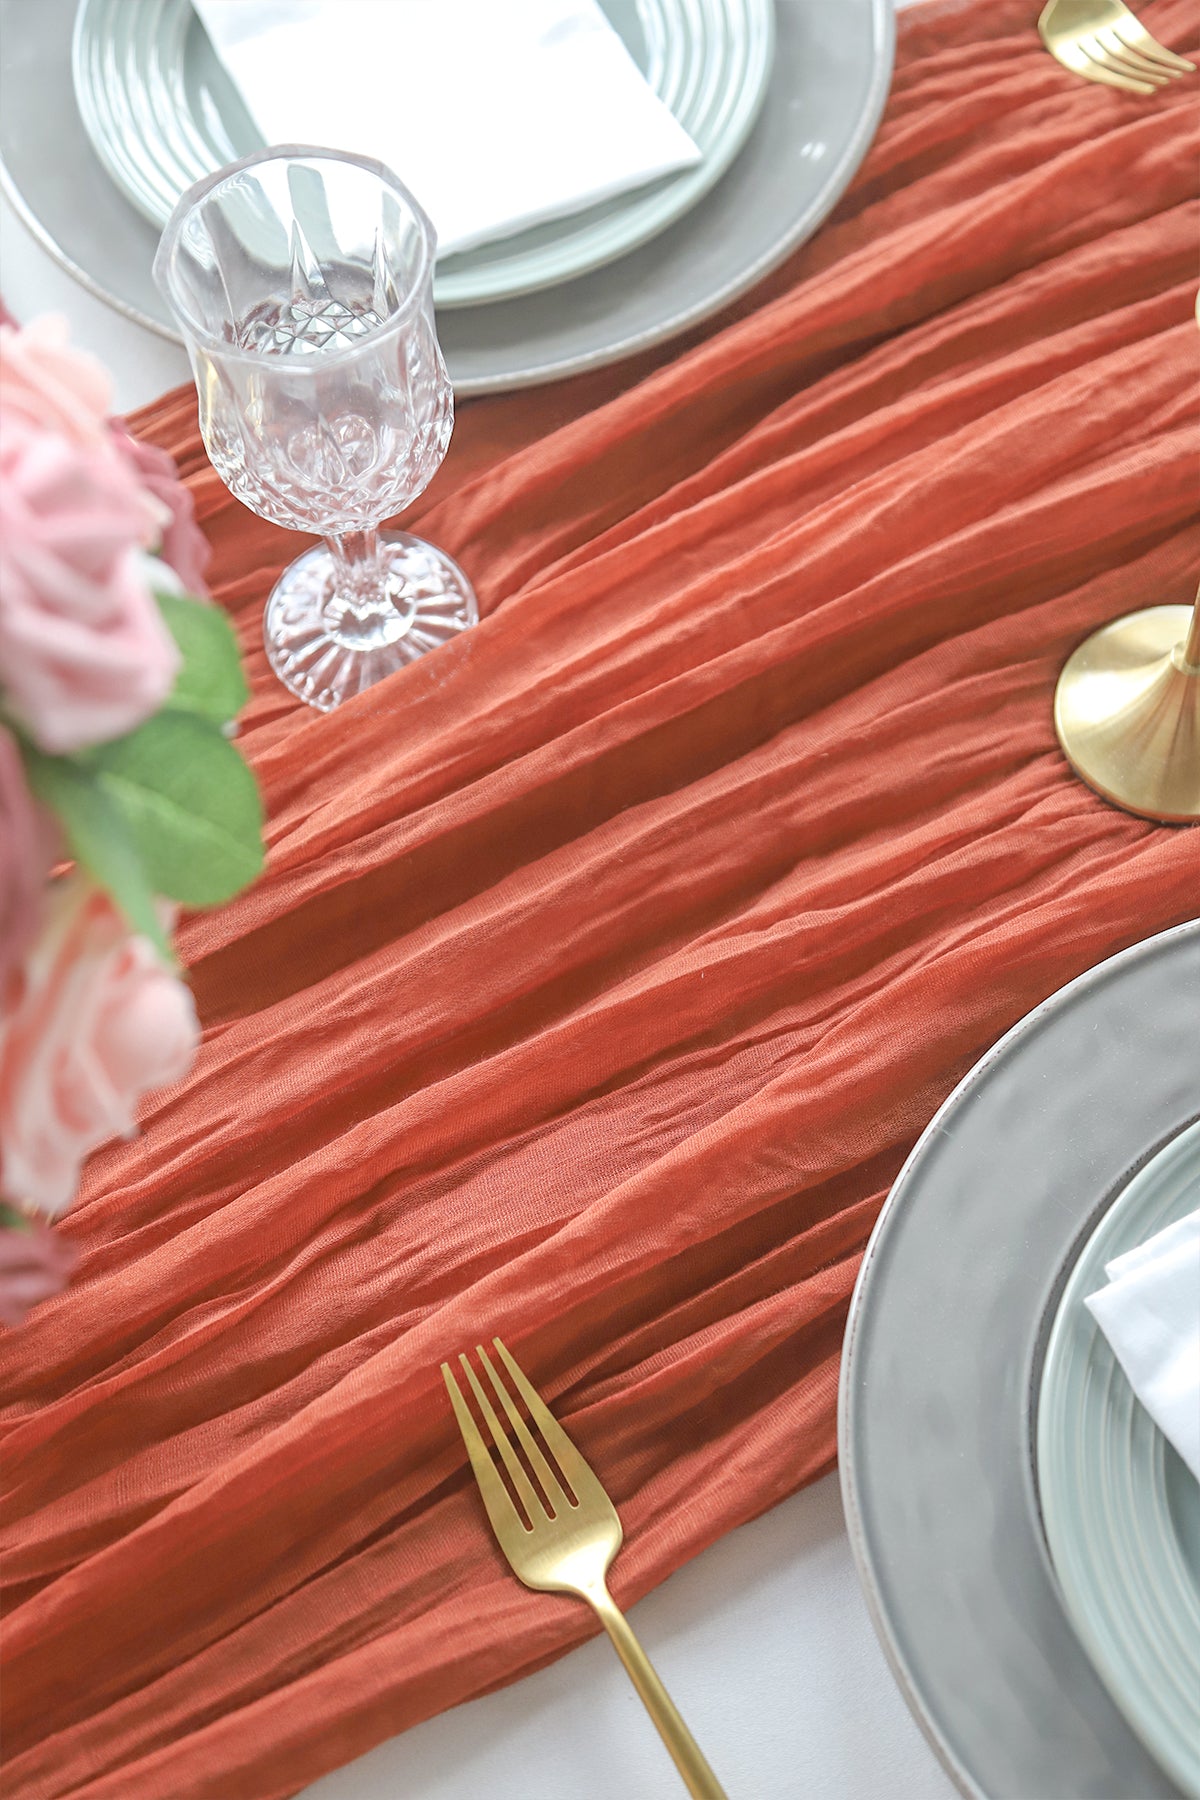 2 Pcs Cheesecloth Table Runner - Terracotta